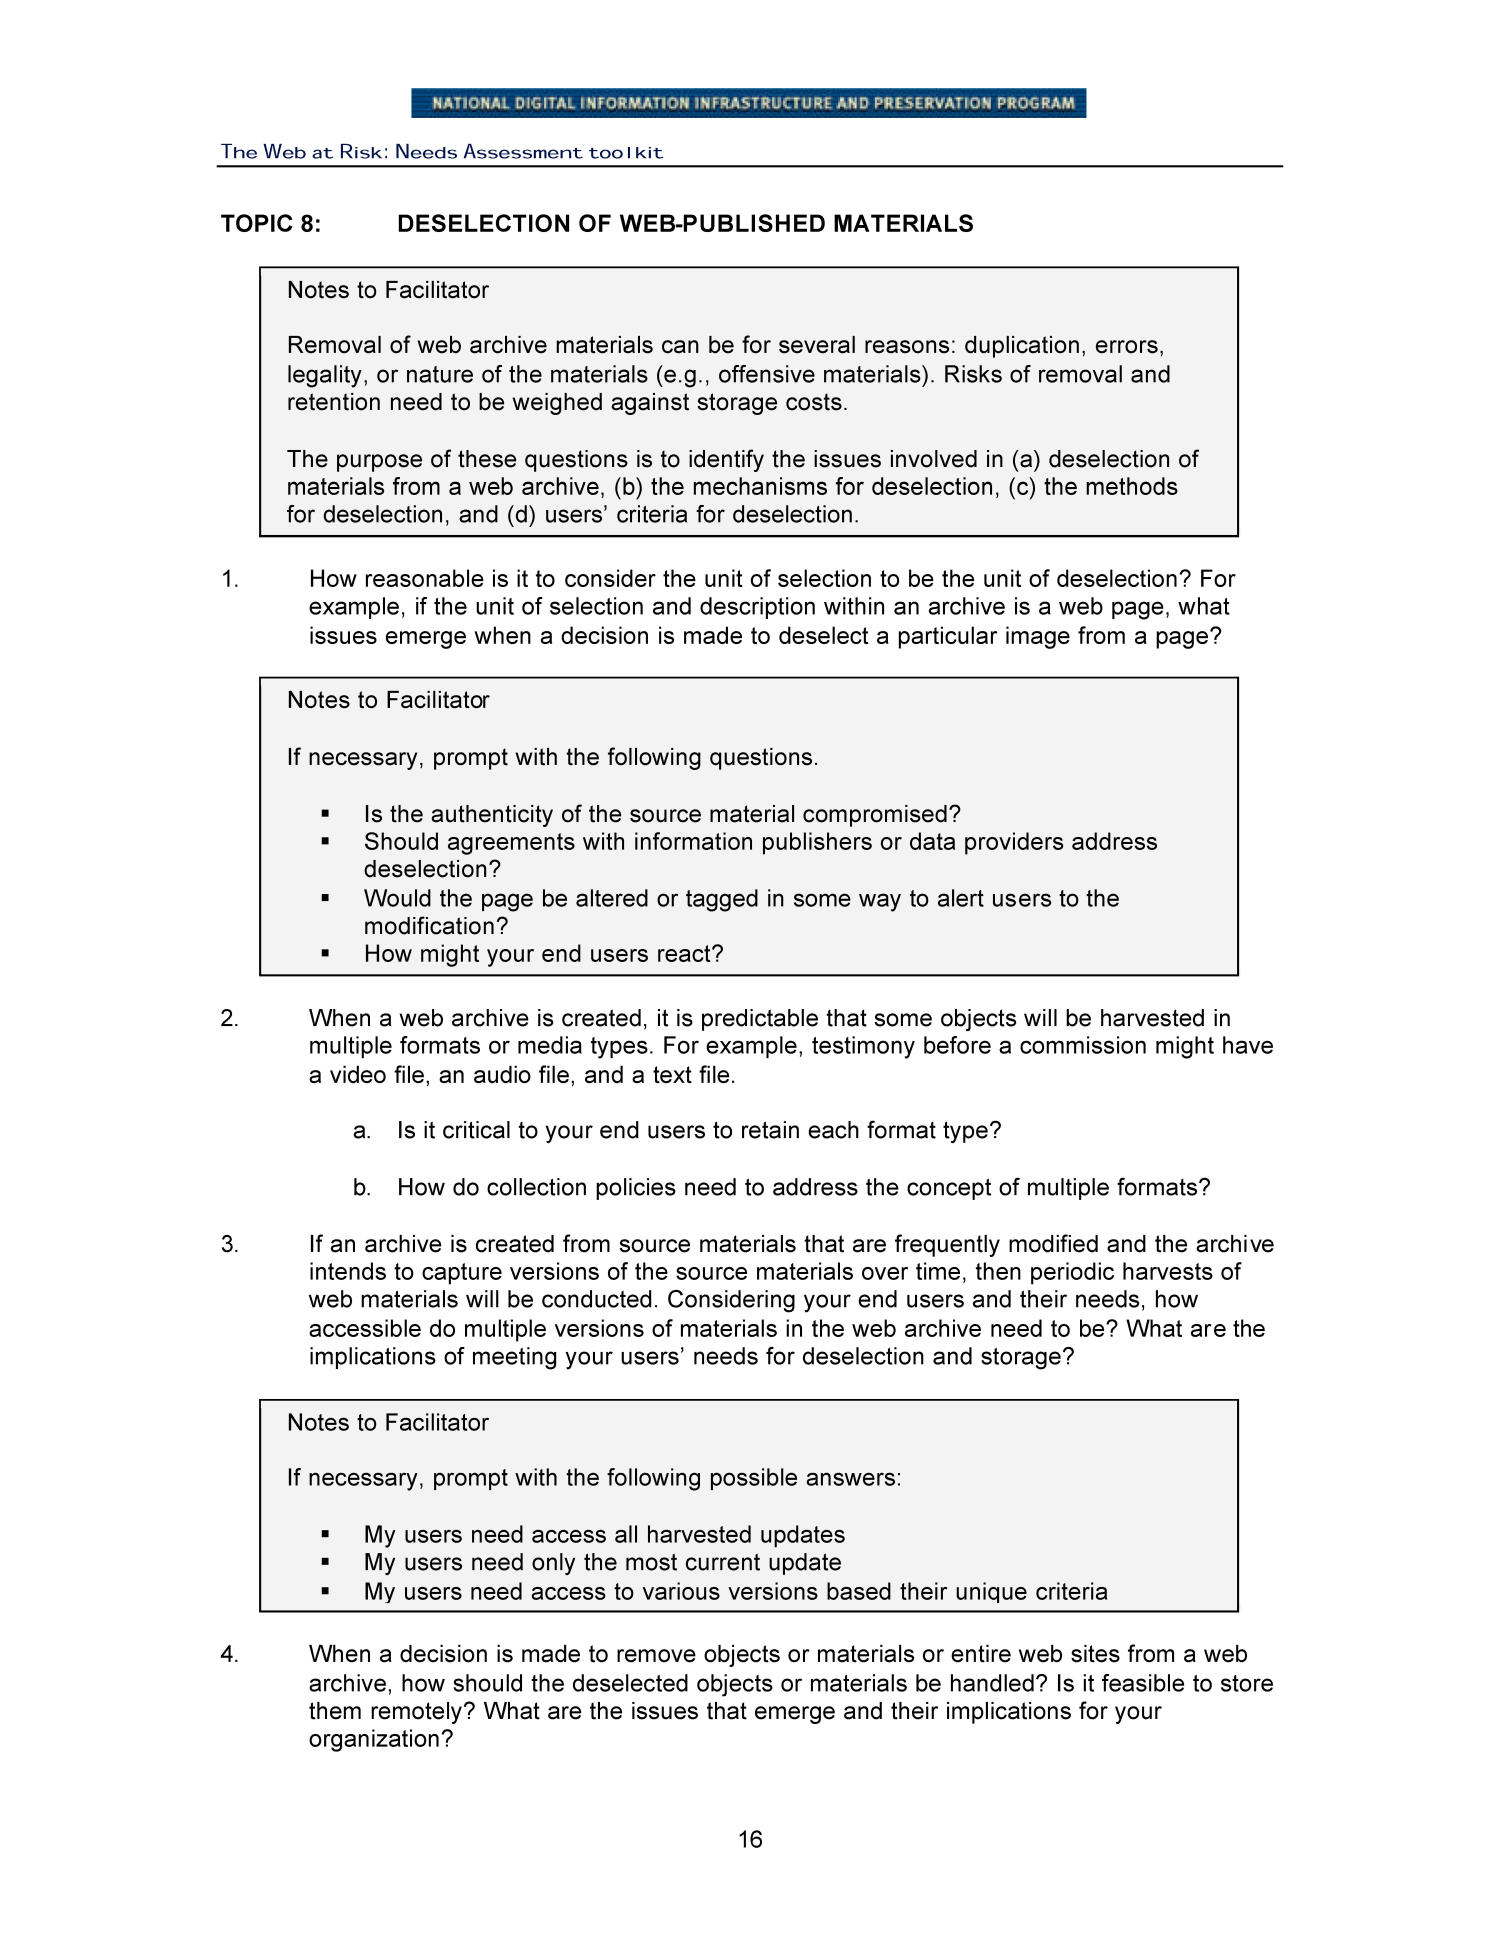 focus-group-discussion-guide-page-16-unt-digital-library